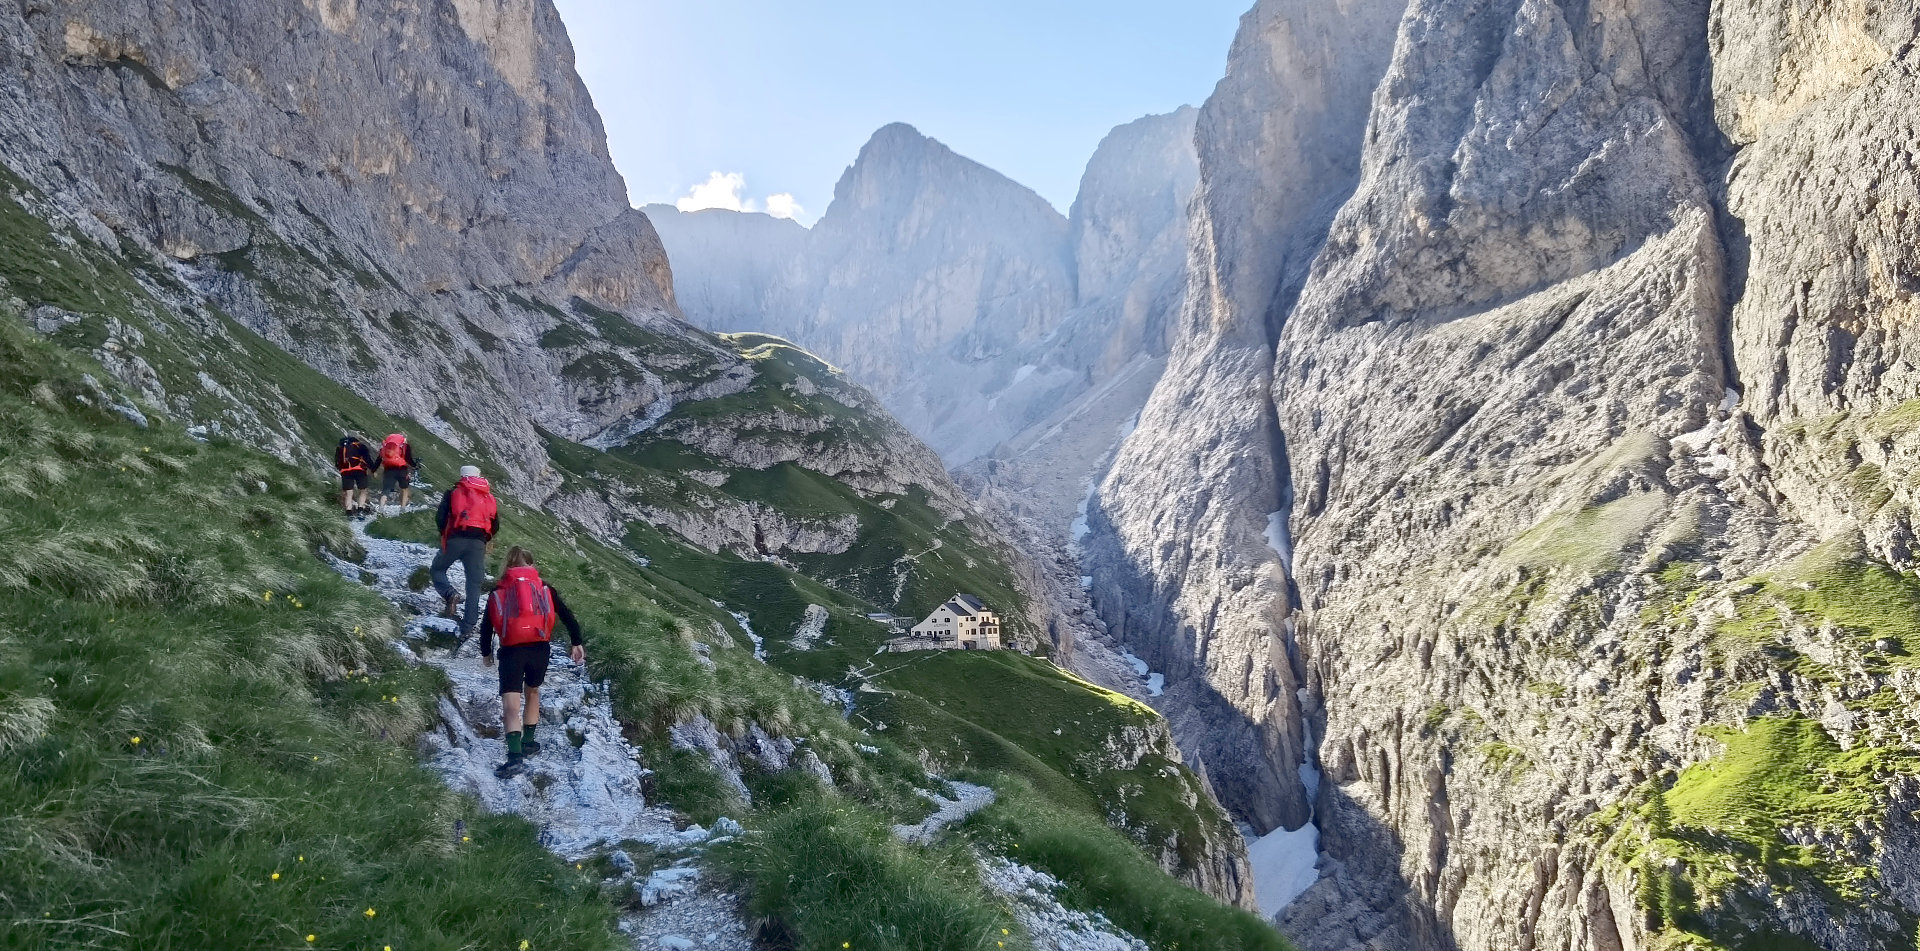 Moving forward to the Dolomites